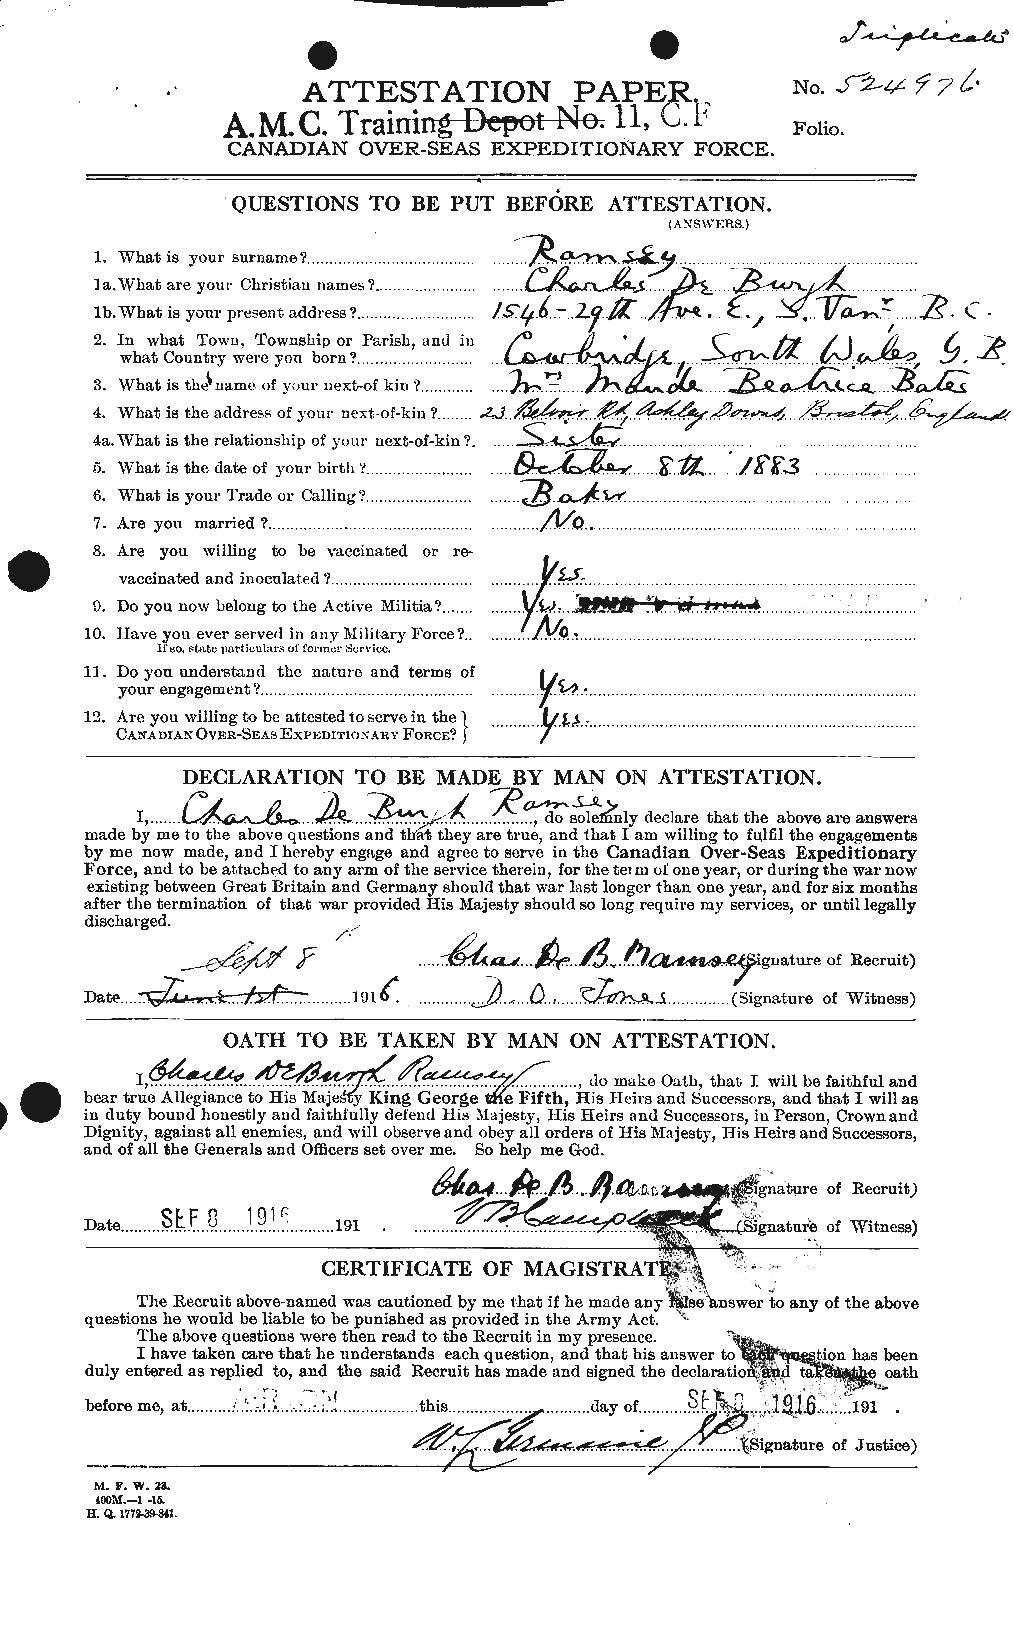 Personnel Records of the First World War - CEF 593836a